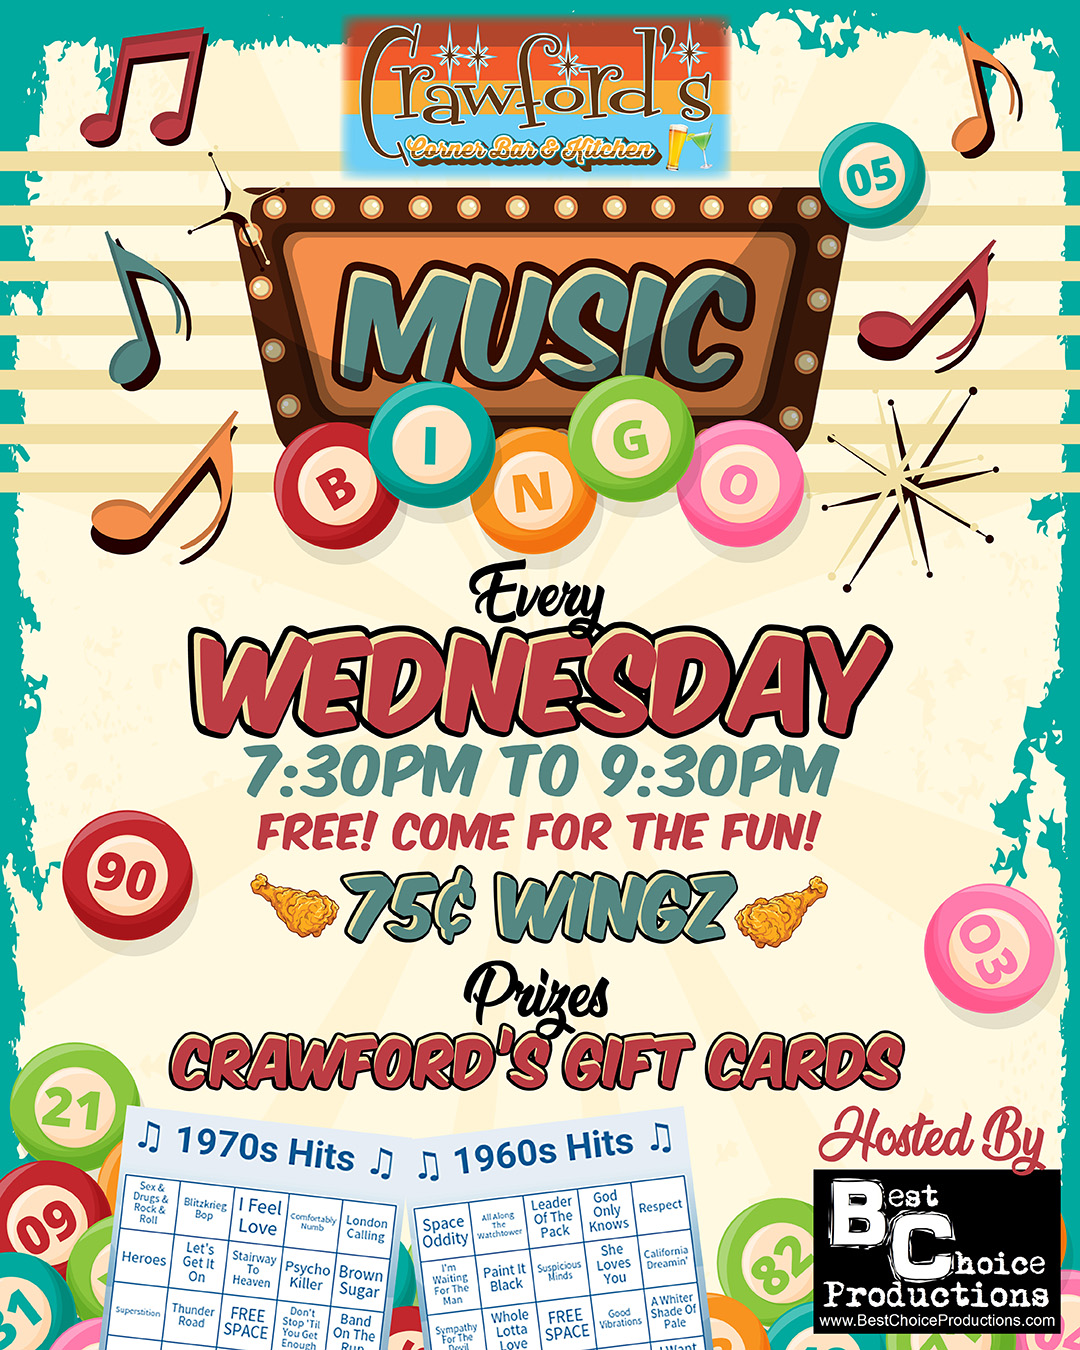 A flyer for the wednesday music king.